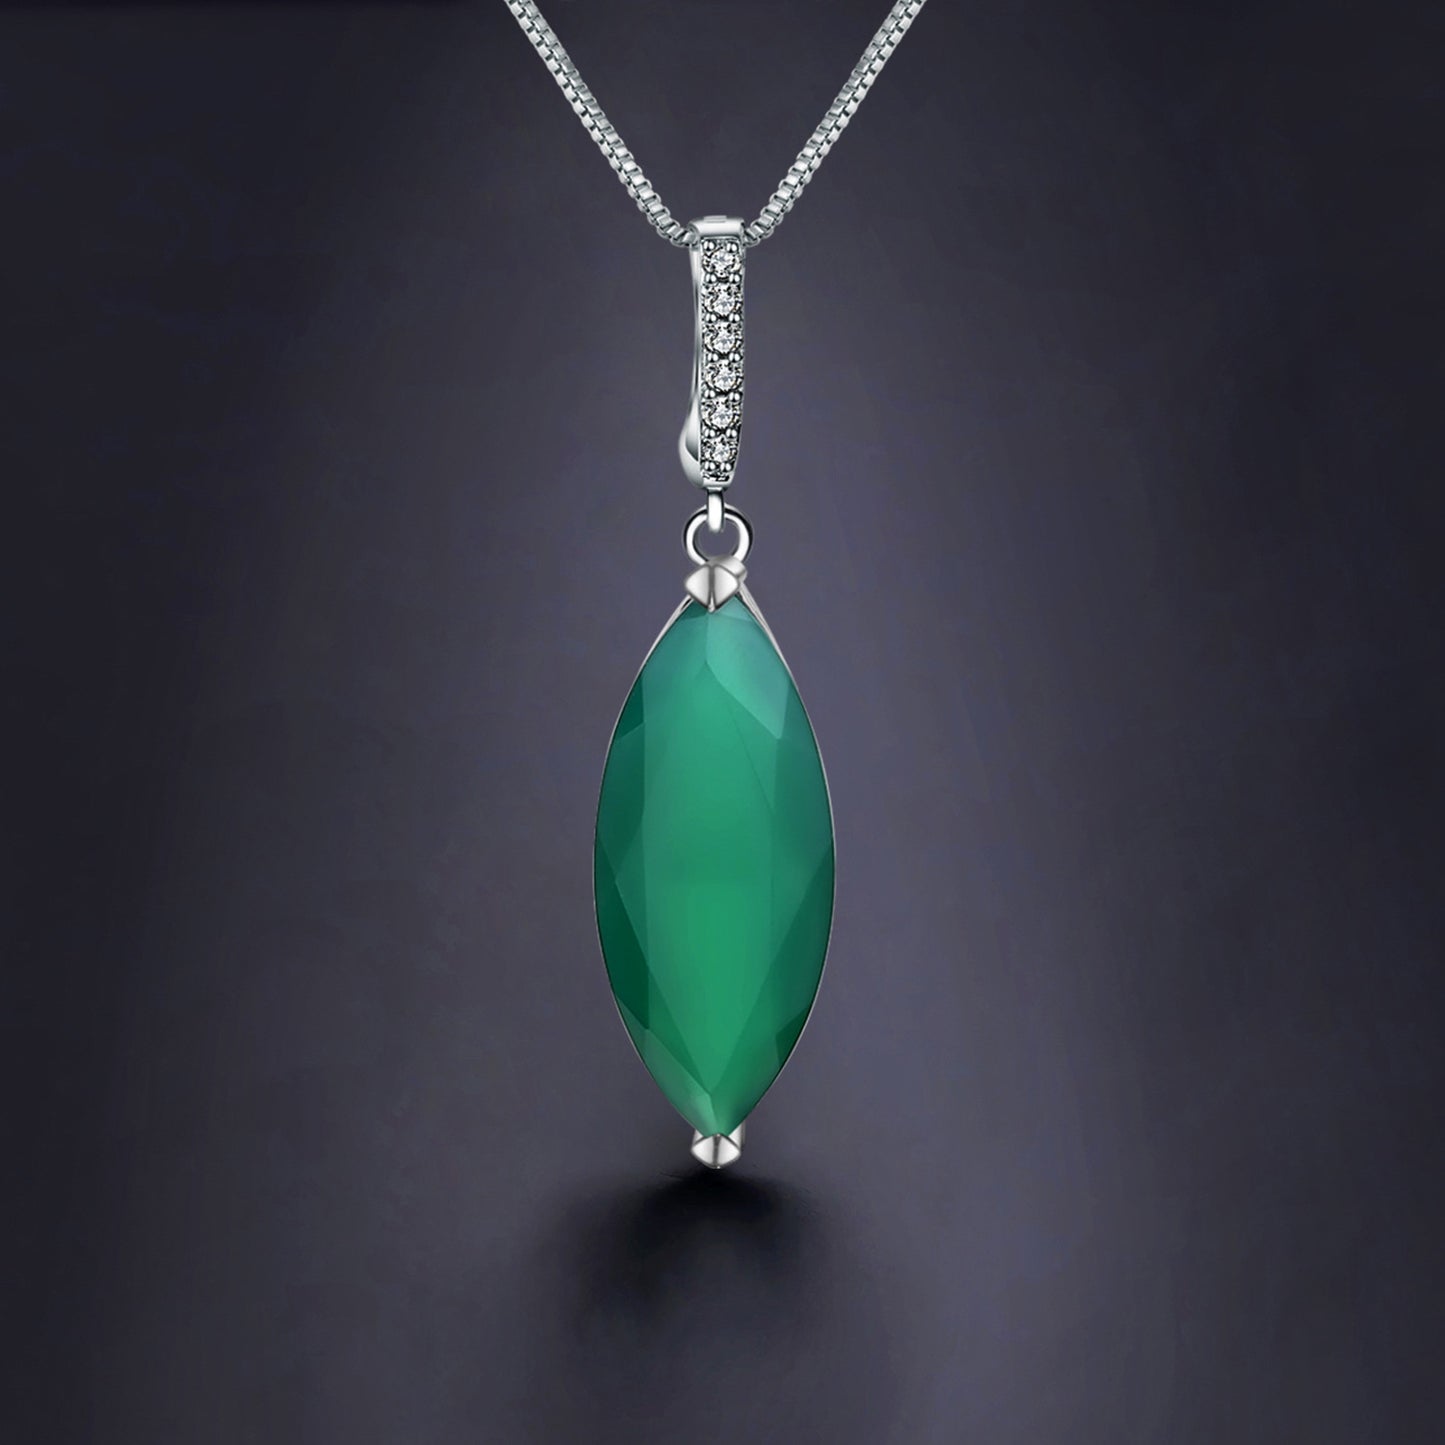 European Temperament Design Inlaid Green Agate Marquise Pendant Sterling Silver Necklace for Women